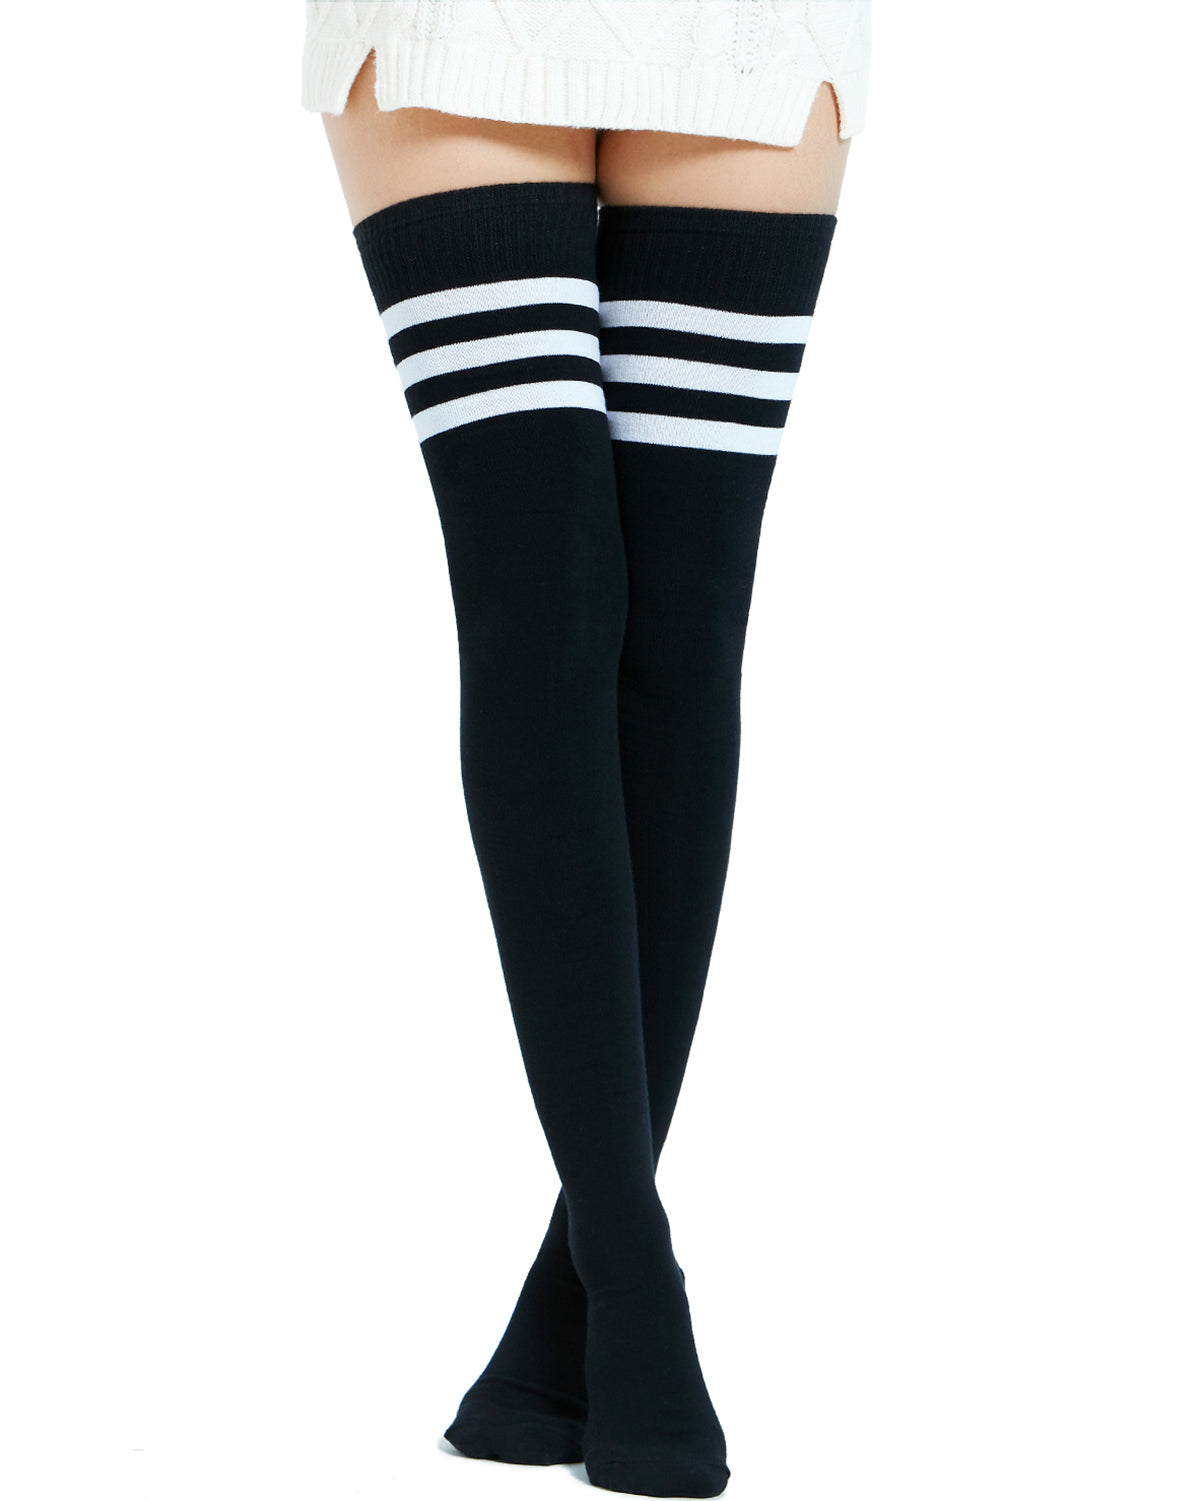 Kayhoma Extra Long Cotton Thigh High Socks Over the Knee High Boot  Stockings Cot